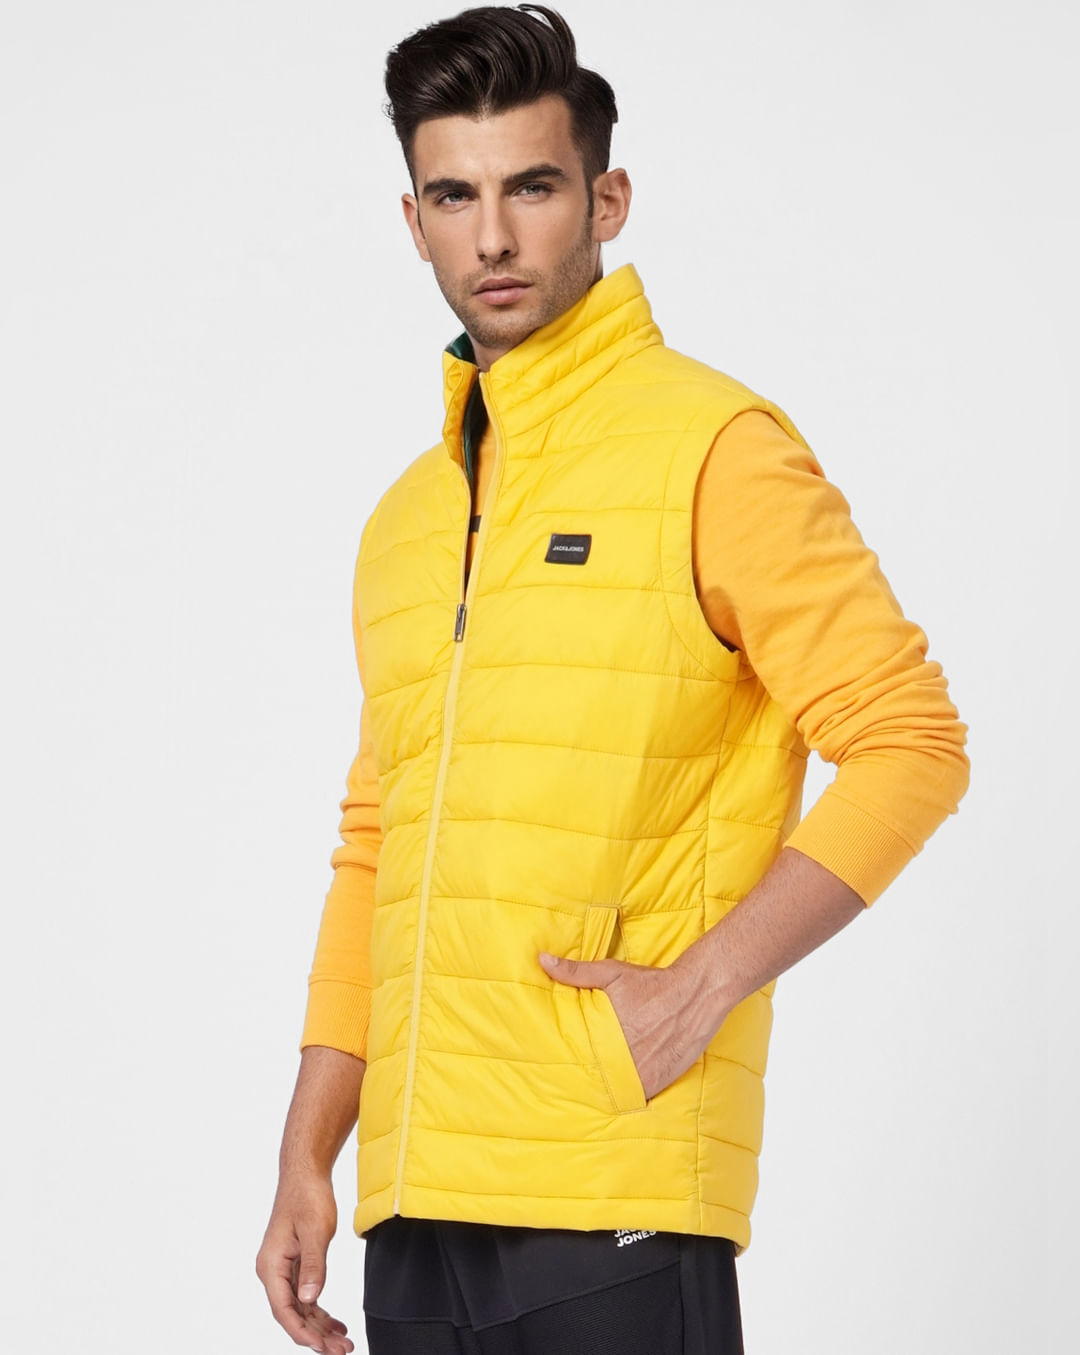 Buy Yellow Puffer Vest Jacket Online in India - Flat 50% Off